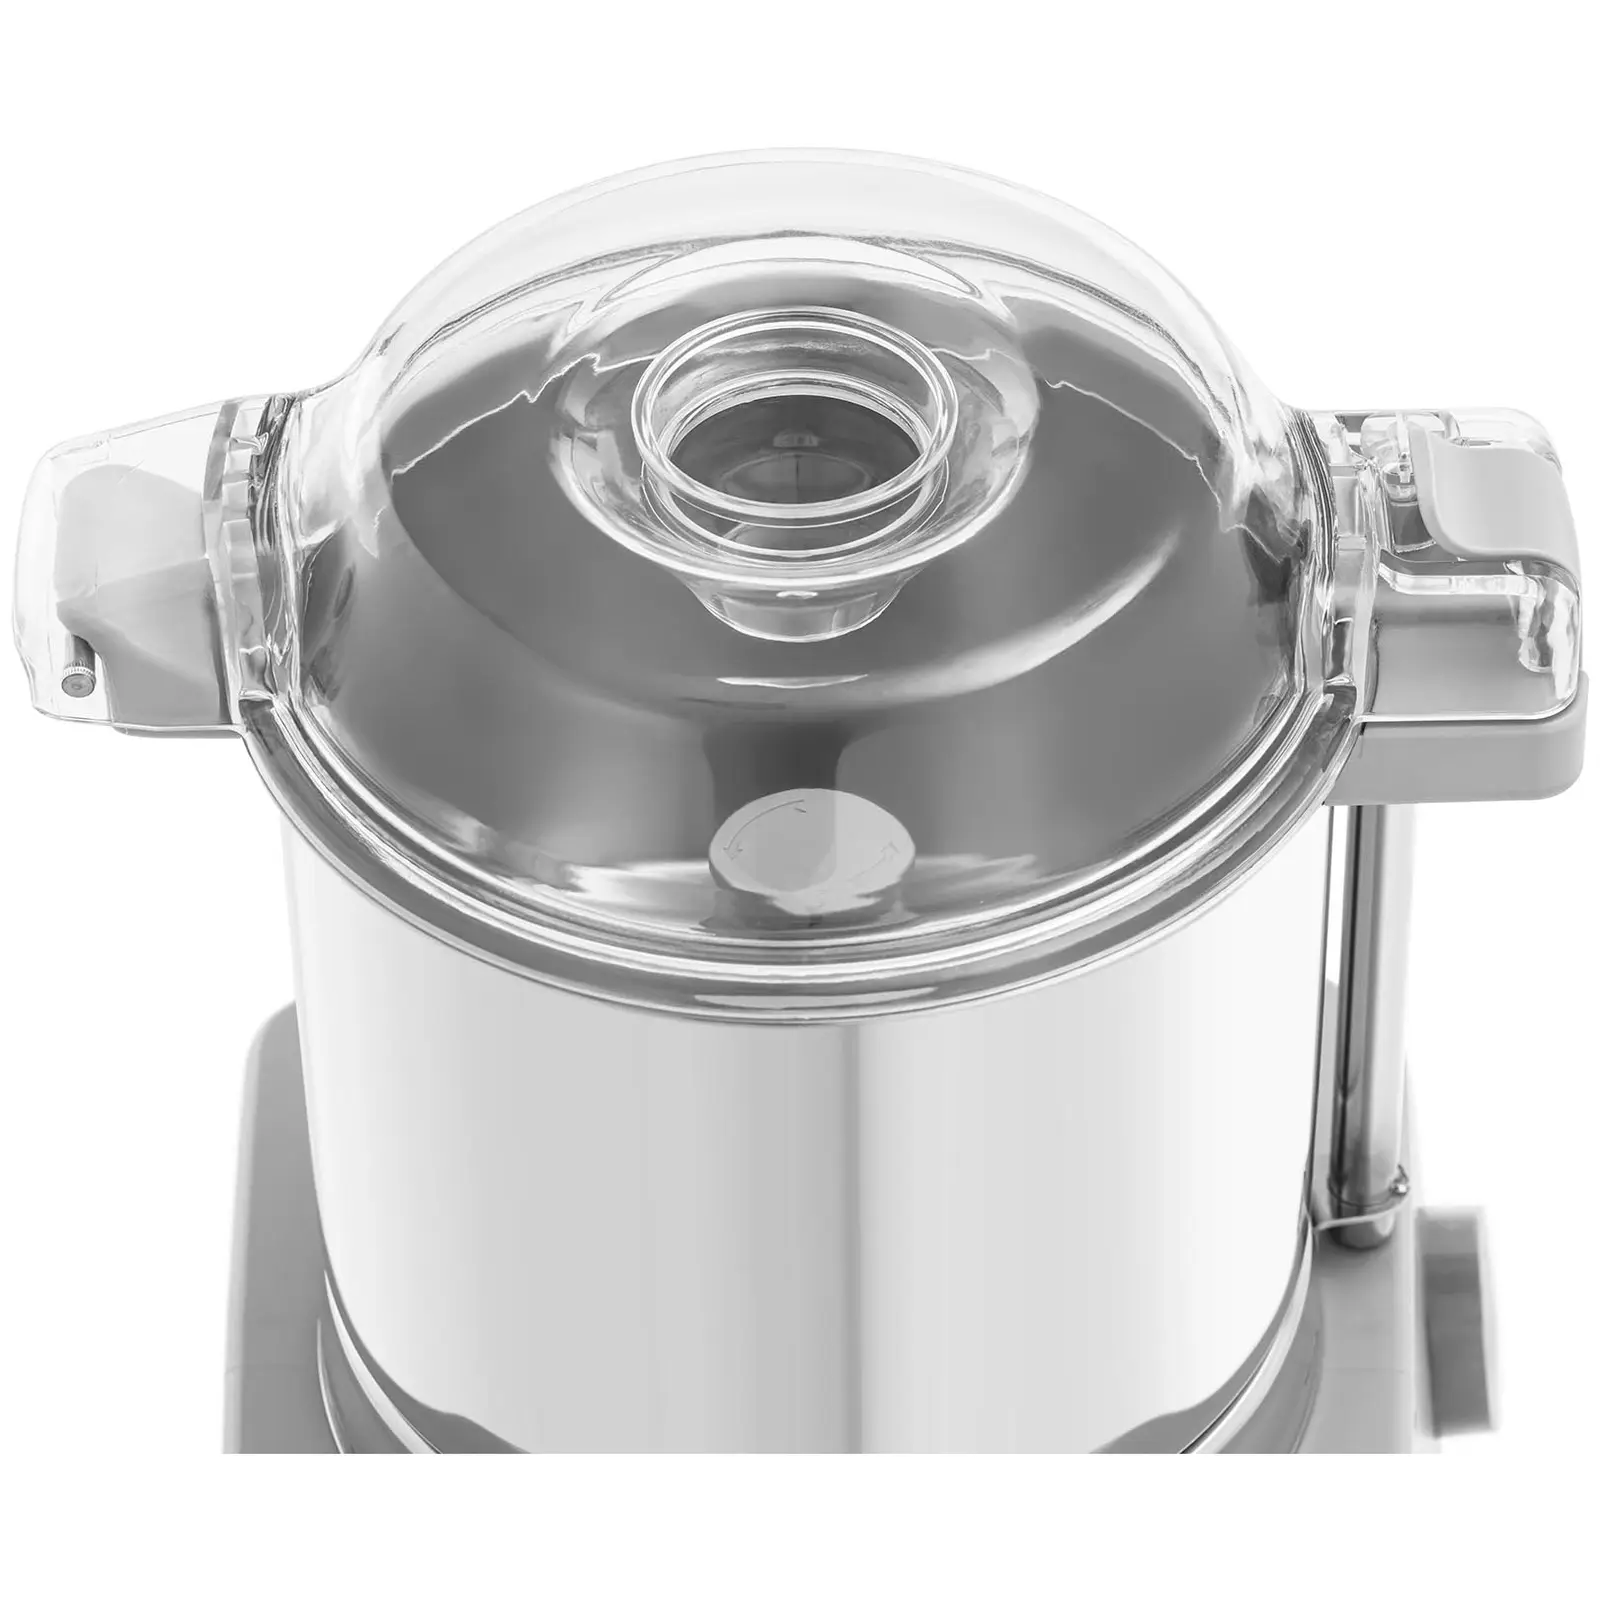 Foodprosessor - 1500 rpm - 3 L - Royal Catering